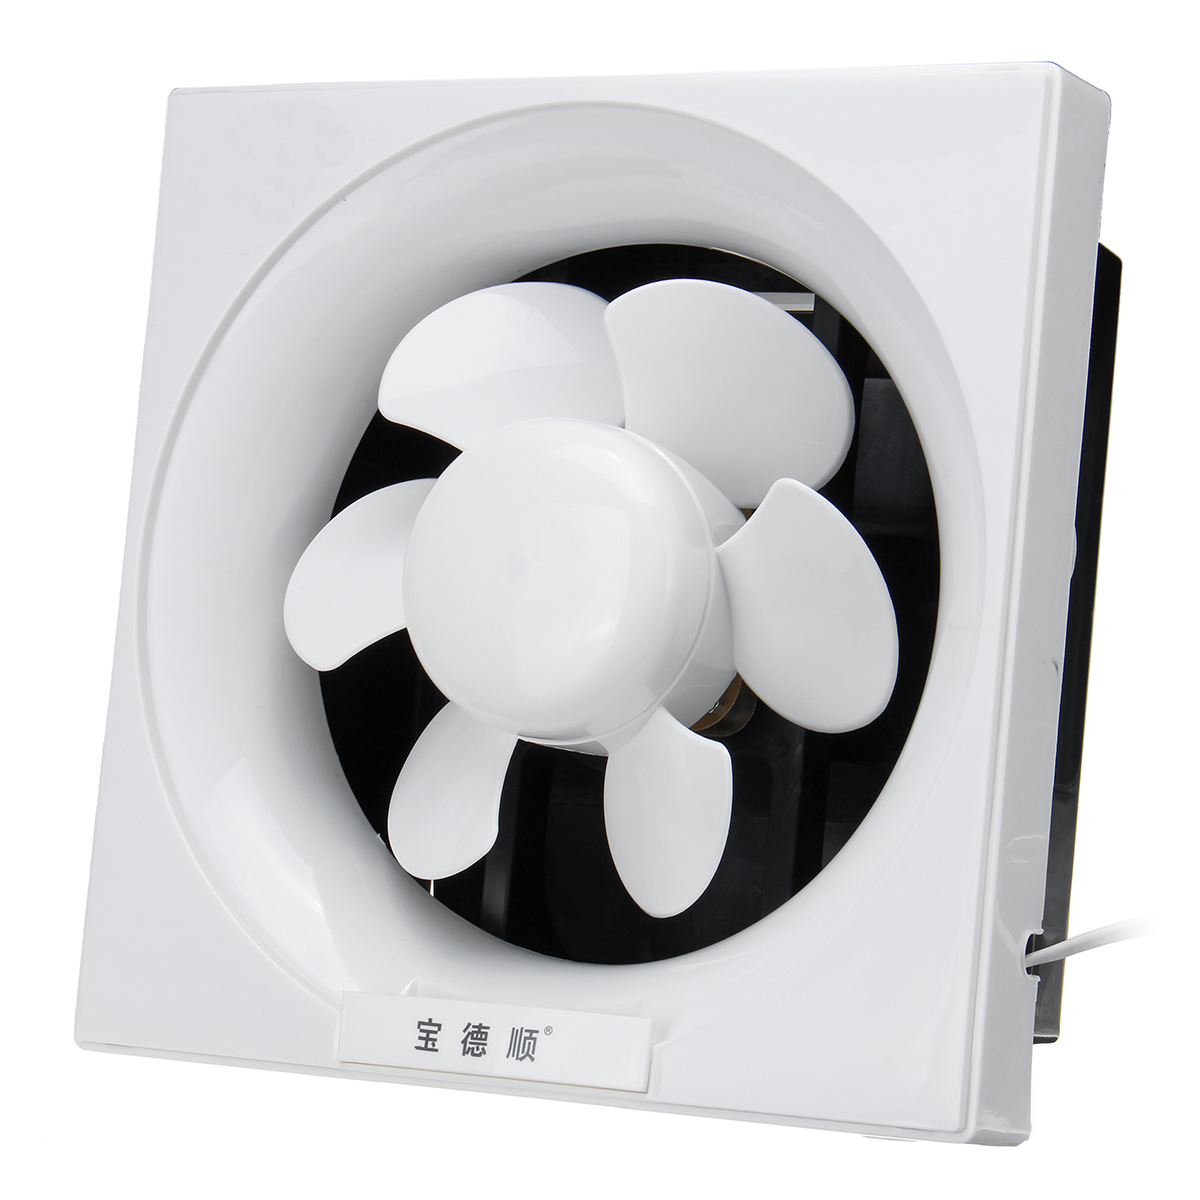 Powerful-Low-Noise-Ventilation-Extractor-Exhaust-Fan-Shutter-for-Bathroo-1348667-5